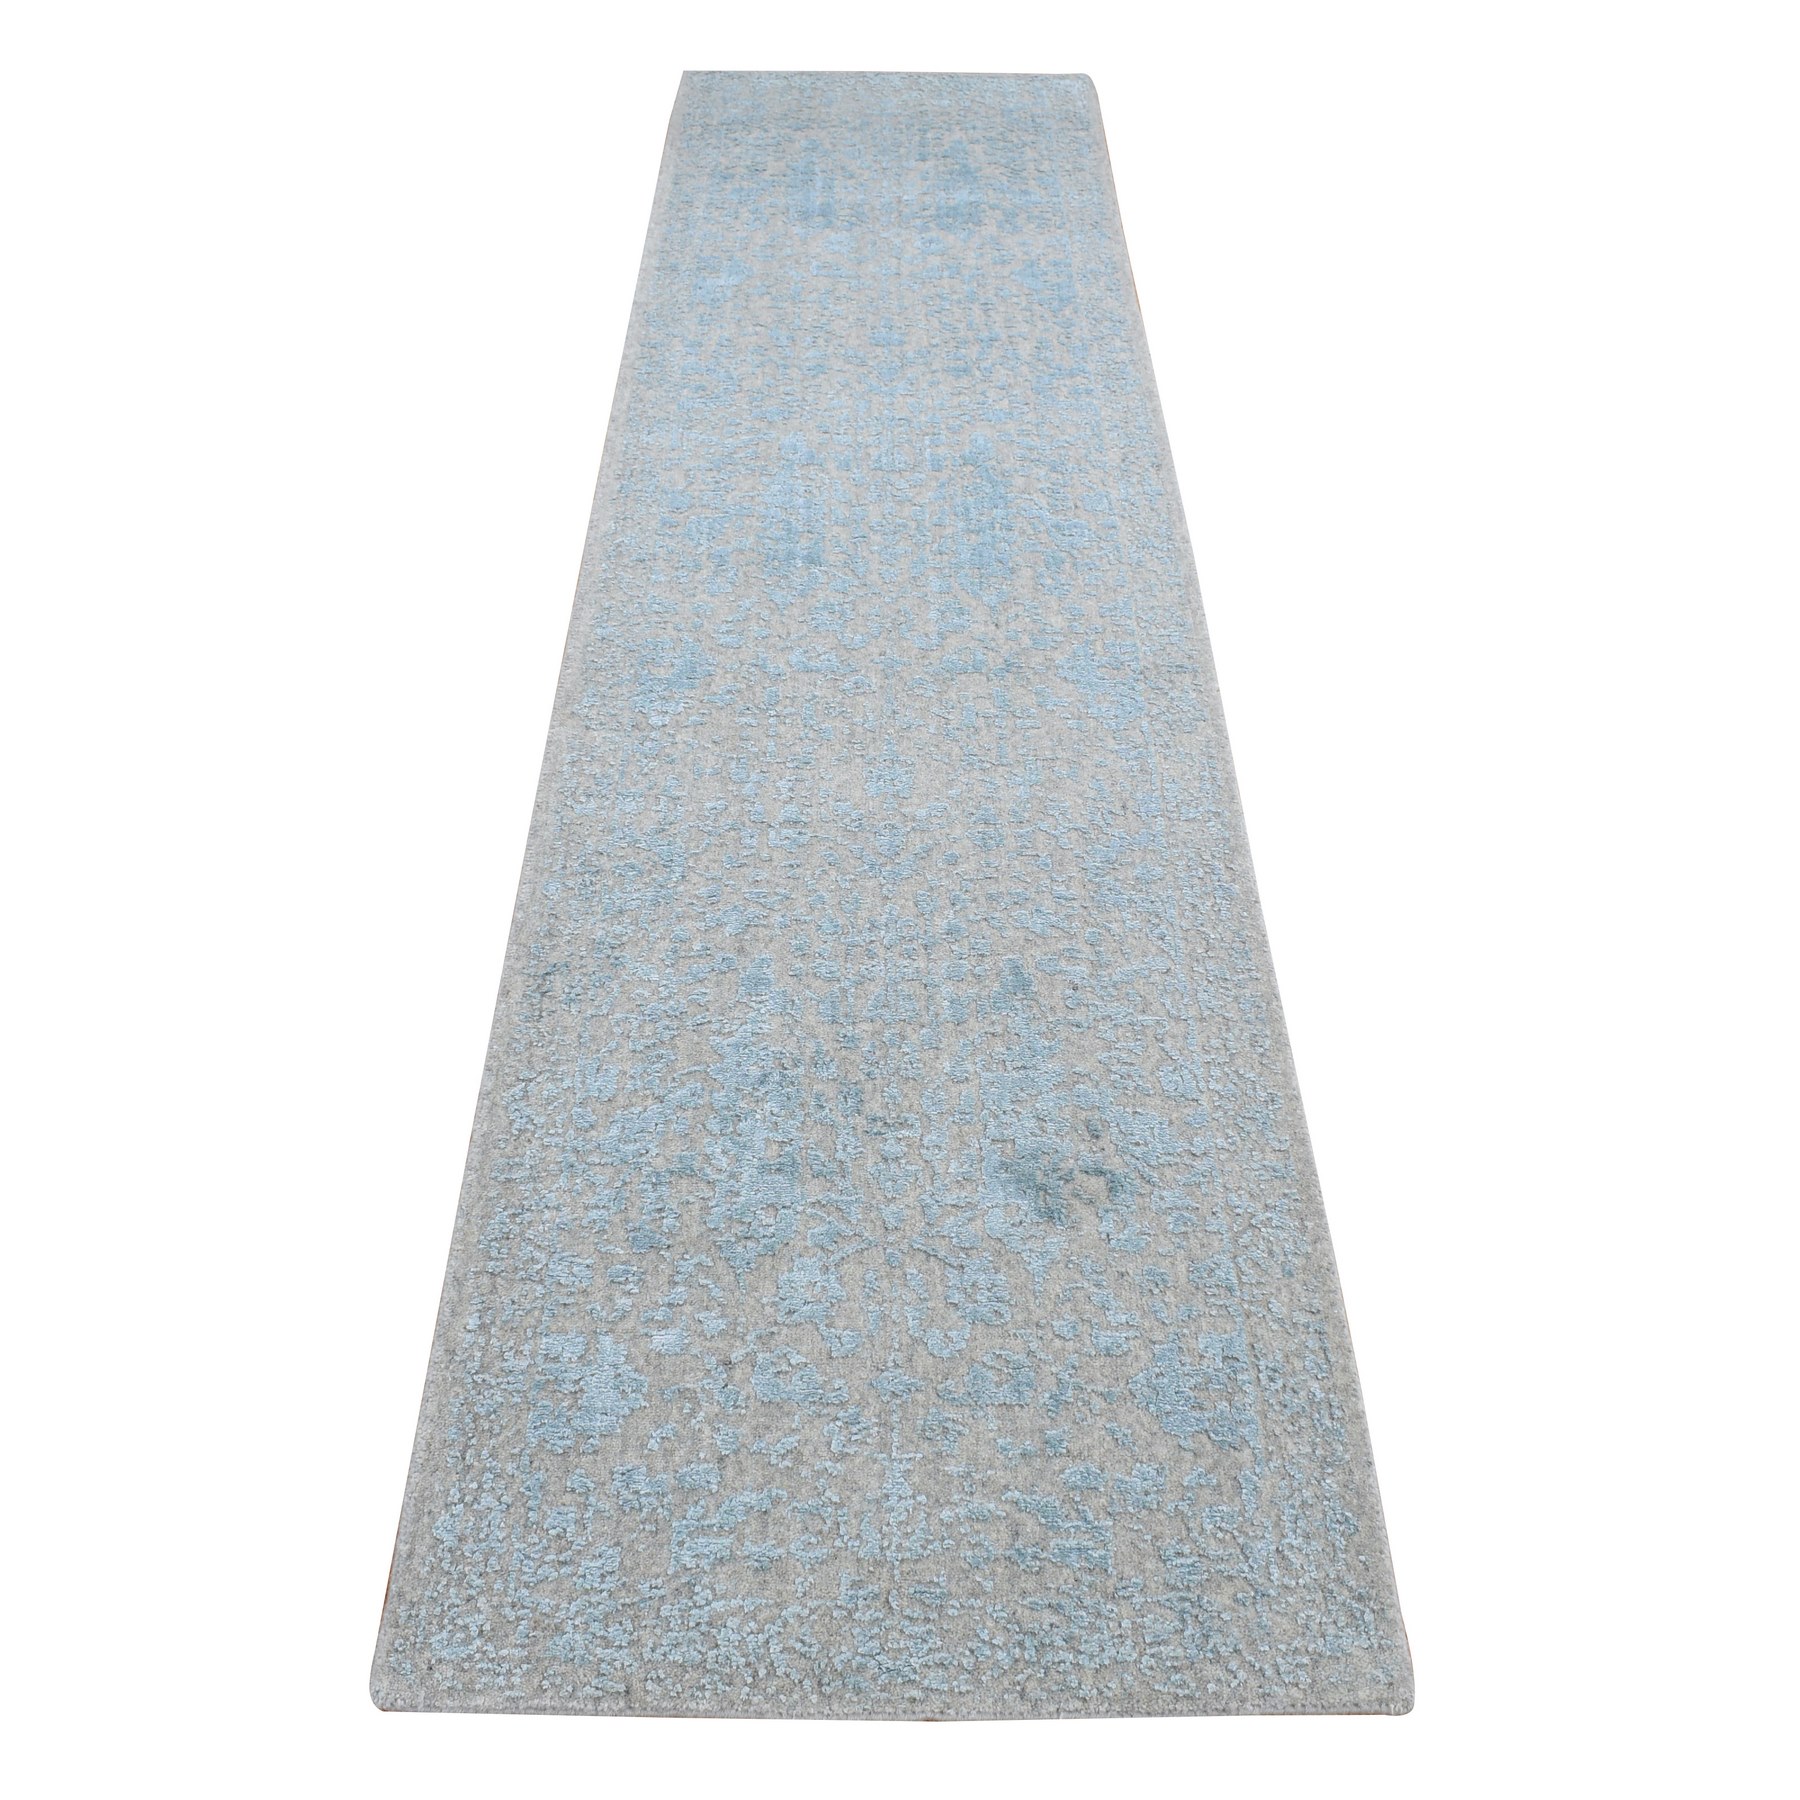 Wool and Silk Rugs LUV785340